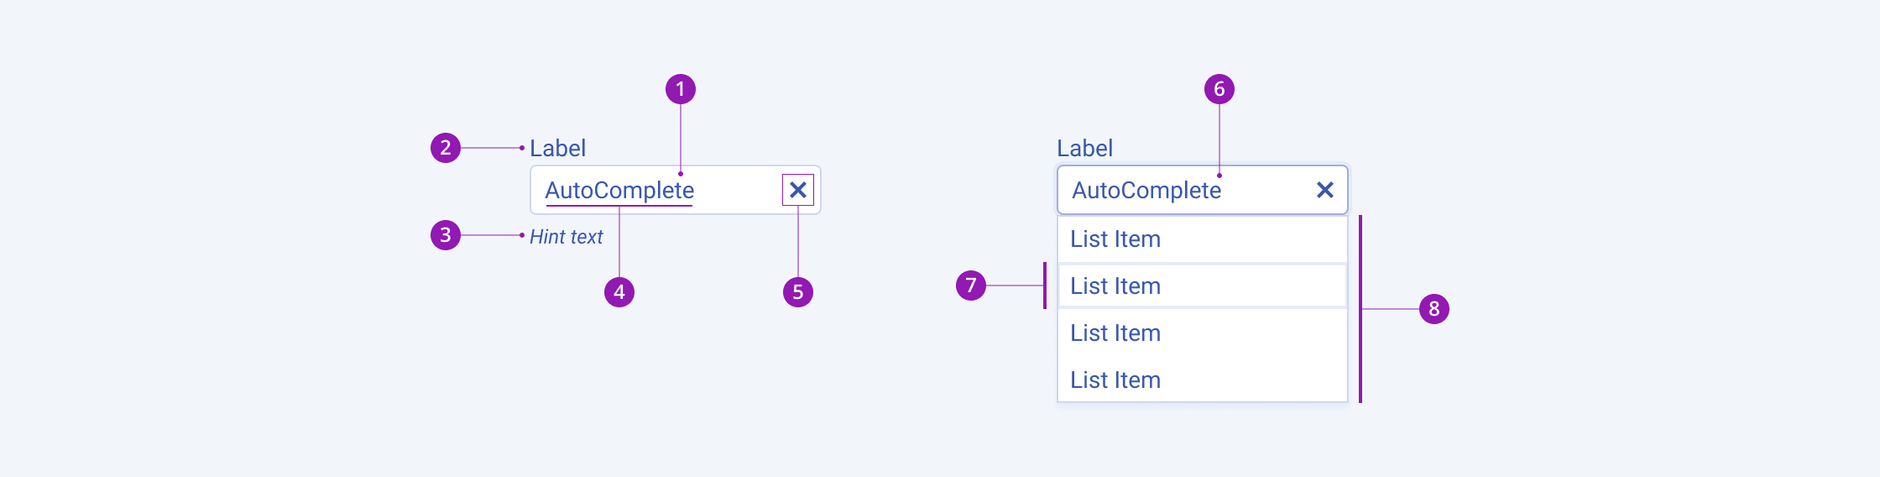 A Telerik and Kendo UI AutoComplete component with the input field, label, hint text, and placeholder or input value.